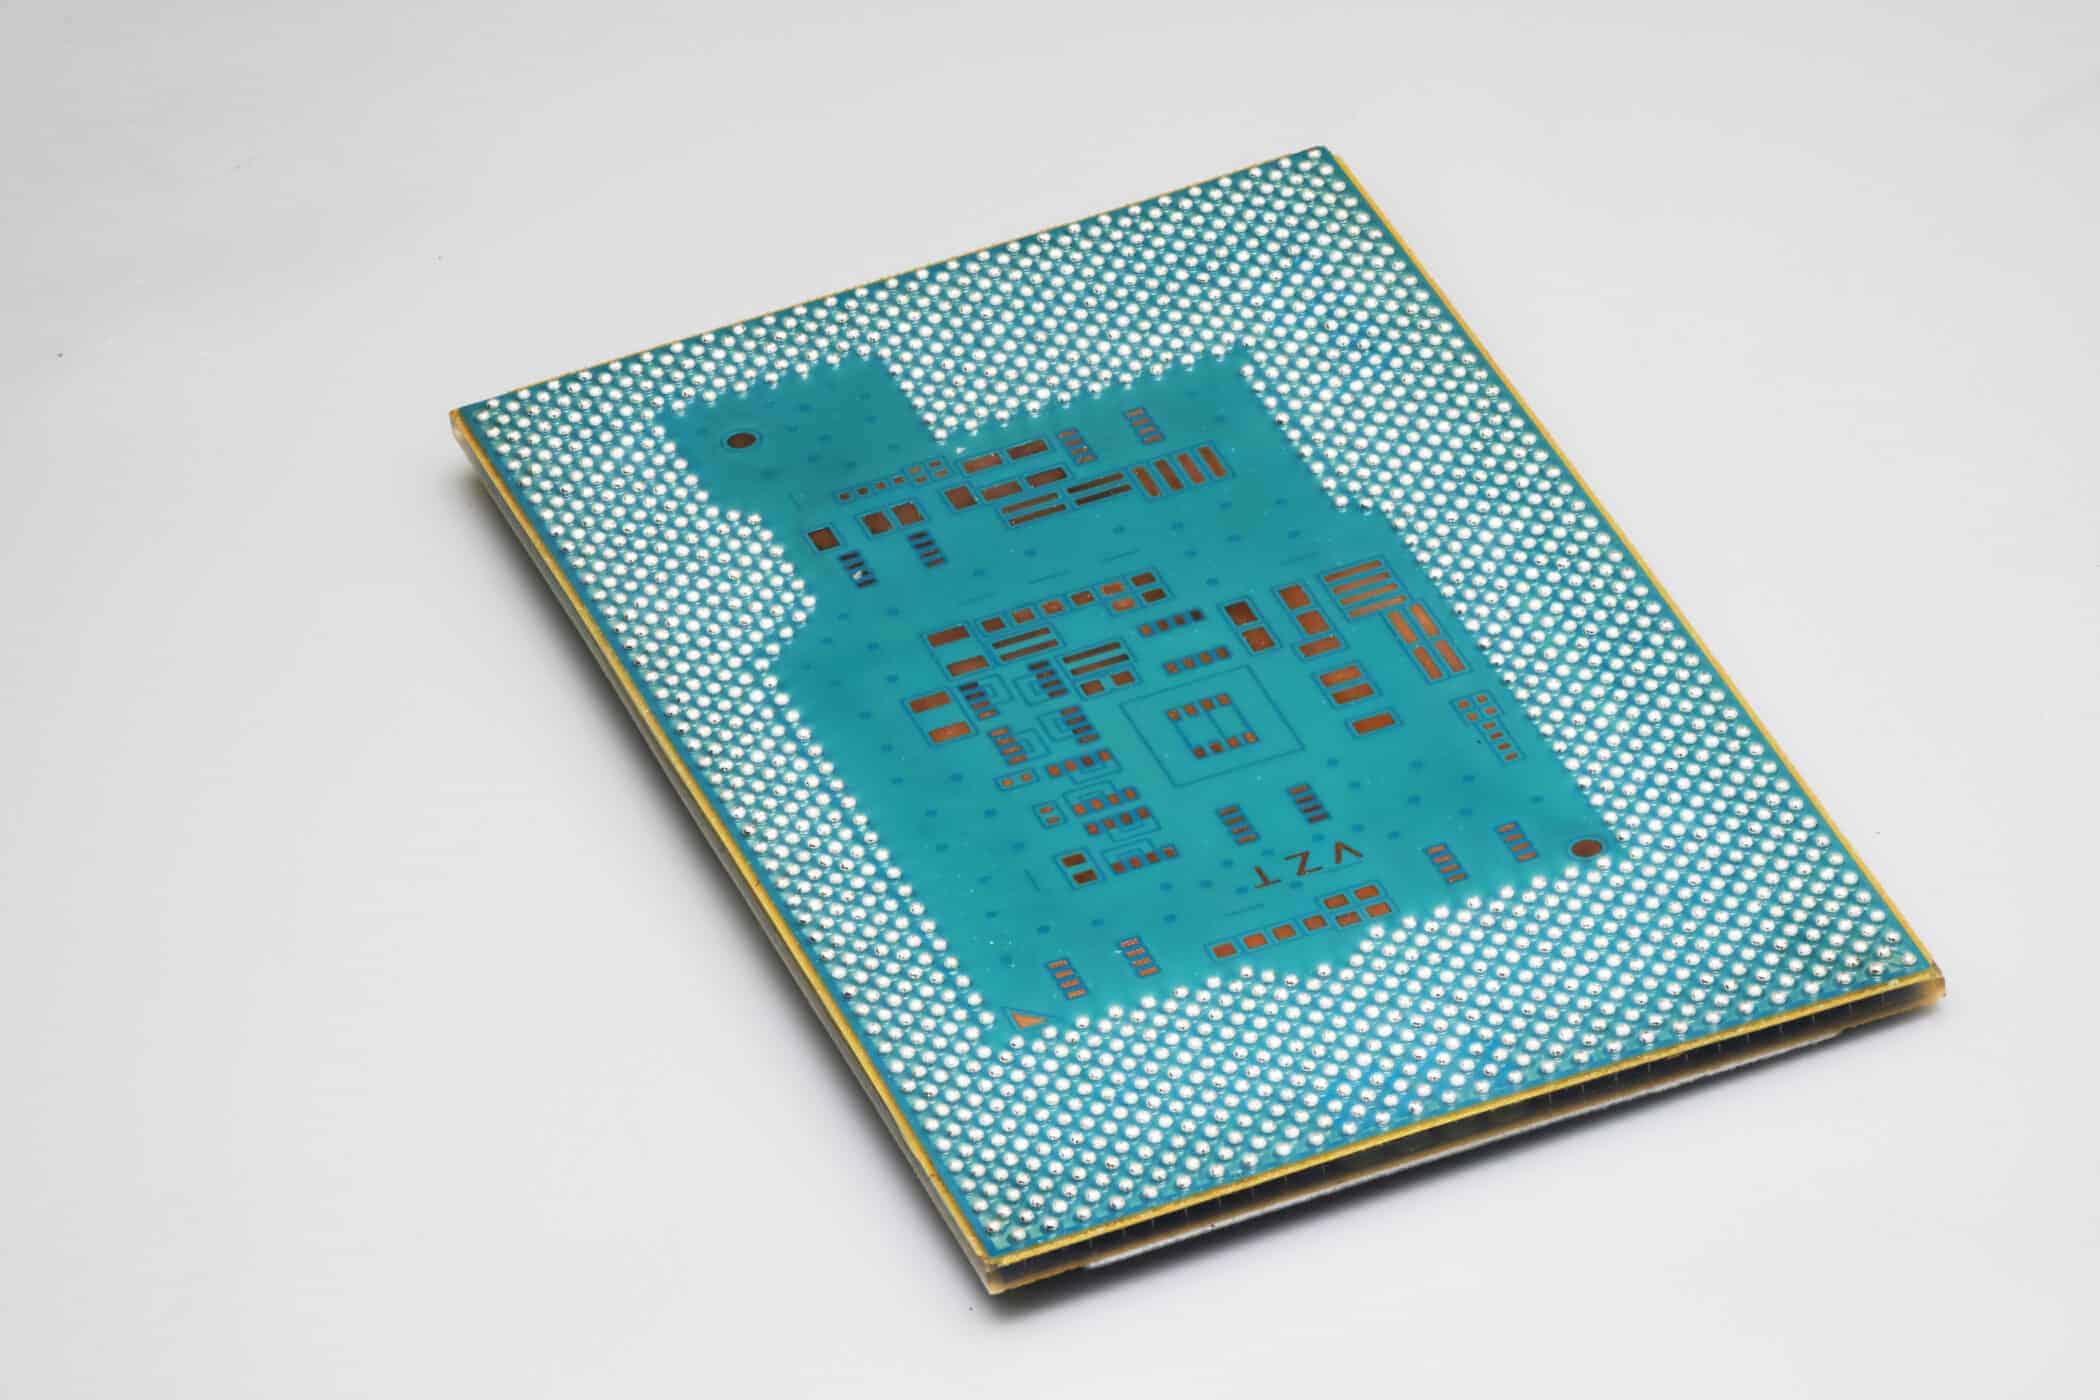 Intel glass substrate 6